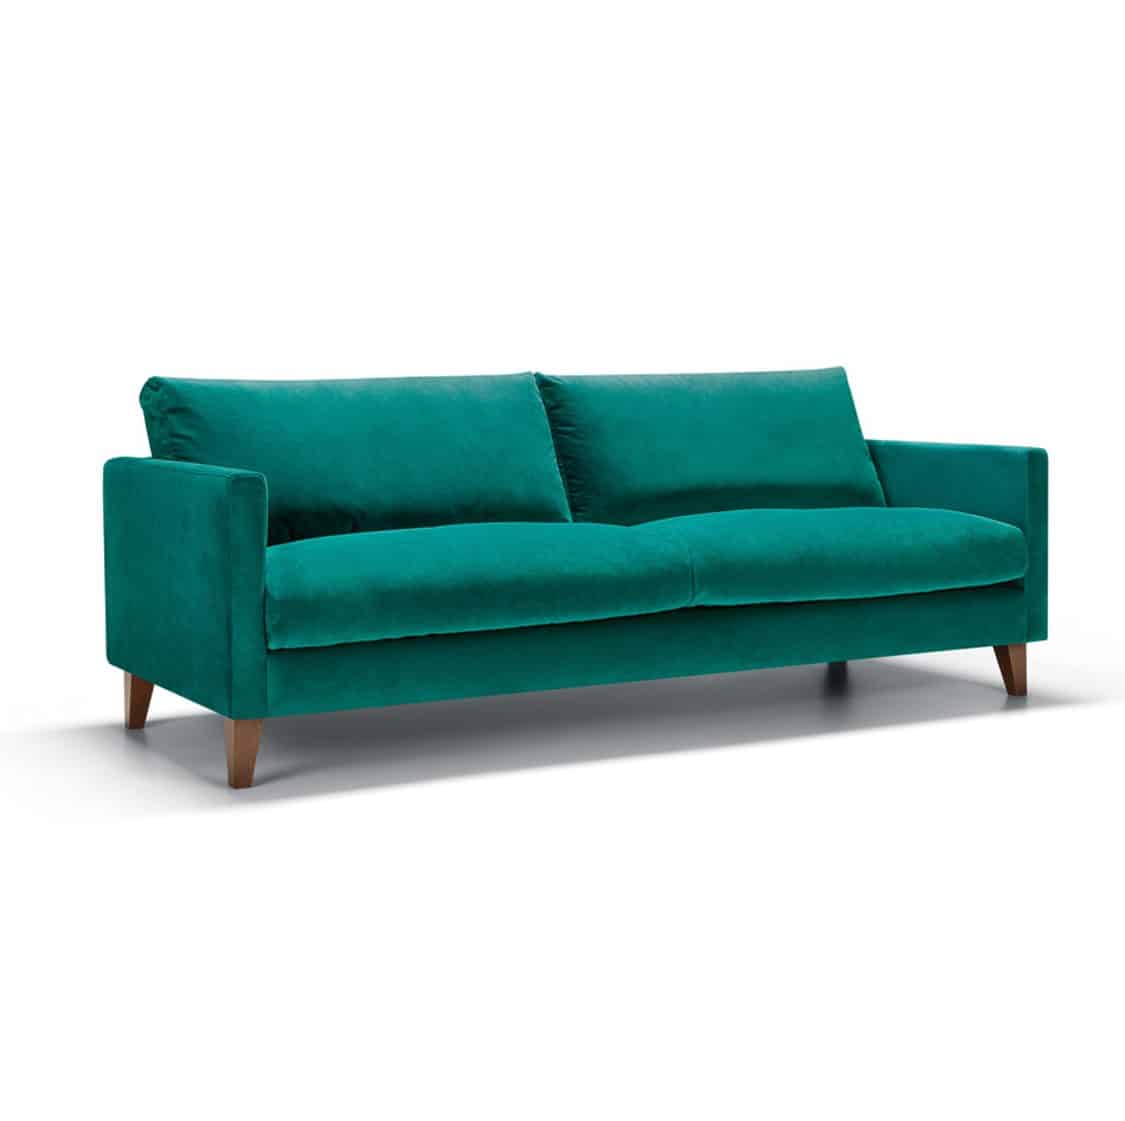 Impulse 3 Seater Sofa Green DeFrae Contract Furniture side